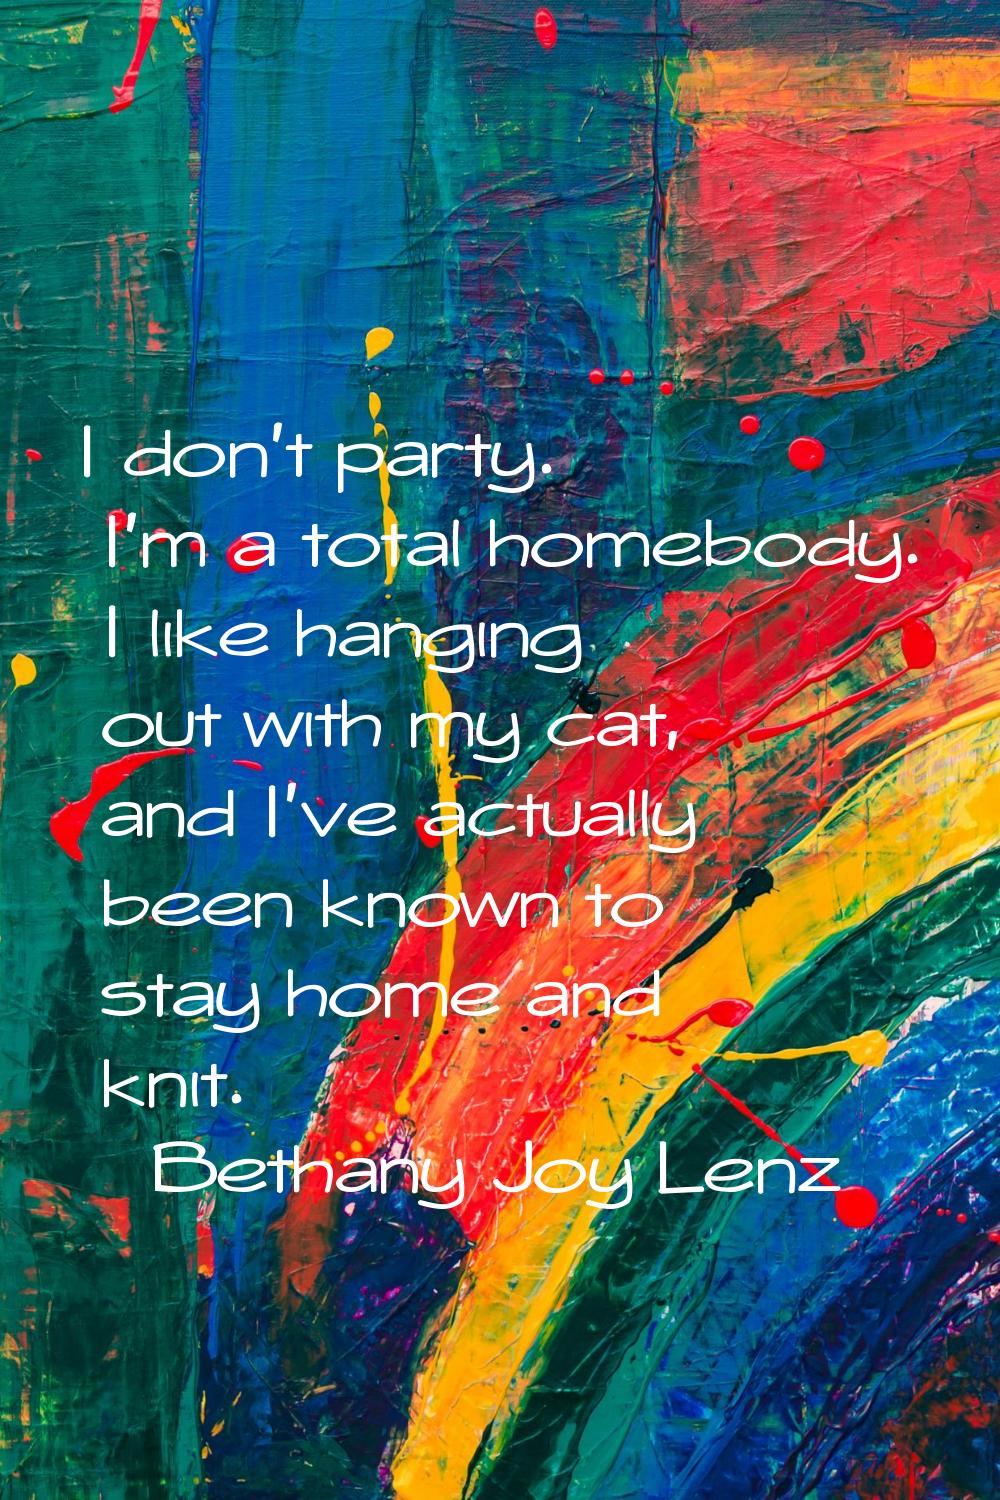 I don't party. I'm a total homebody. I like hanging out with my cat, and I've actually been known t